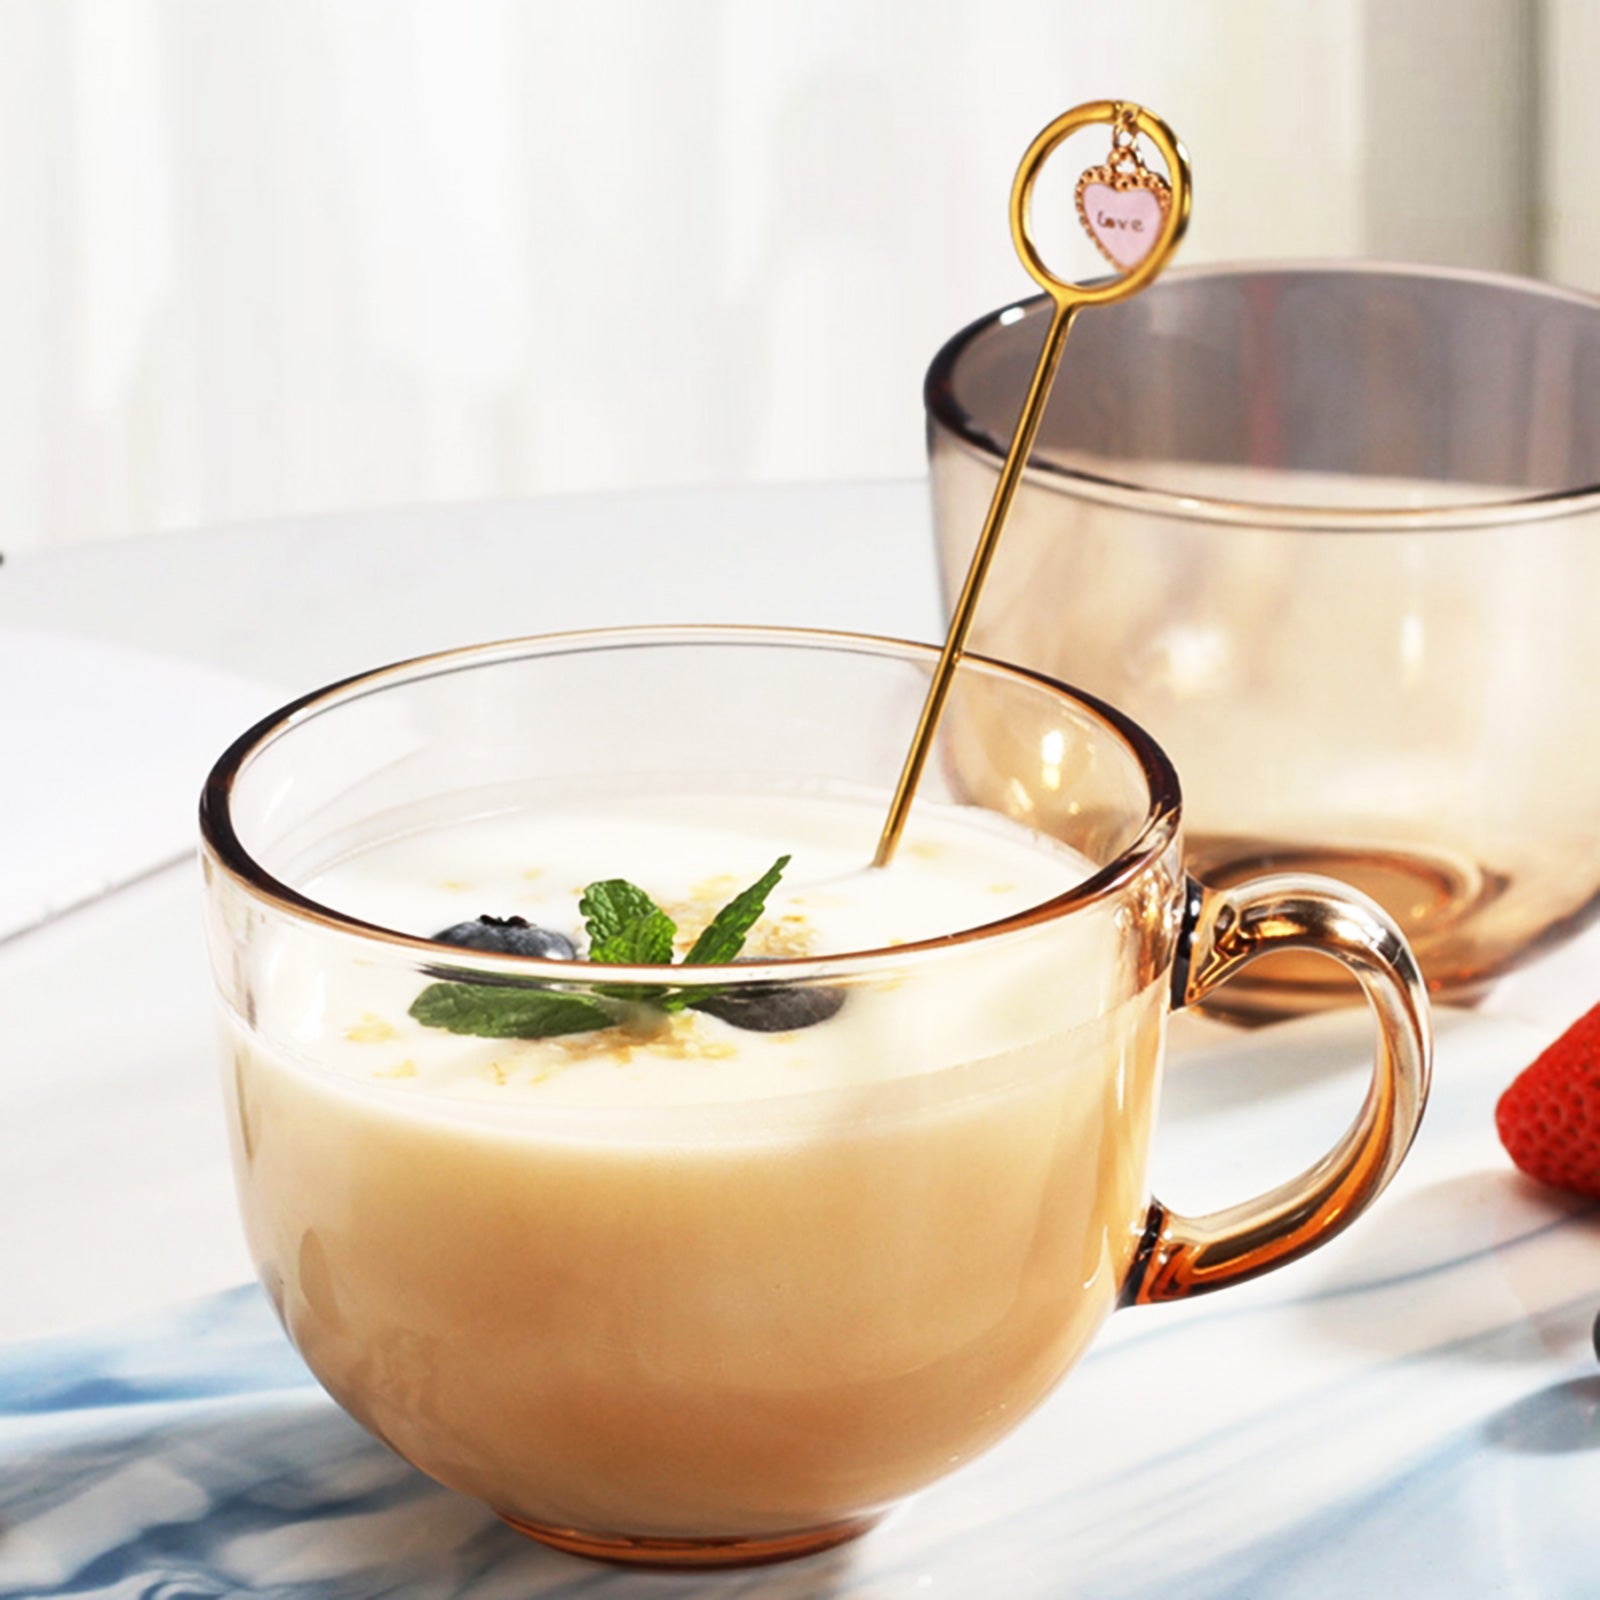 Amber-colored, Heat-Resistant Glass Breakfast Mugs